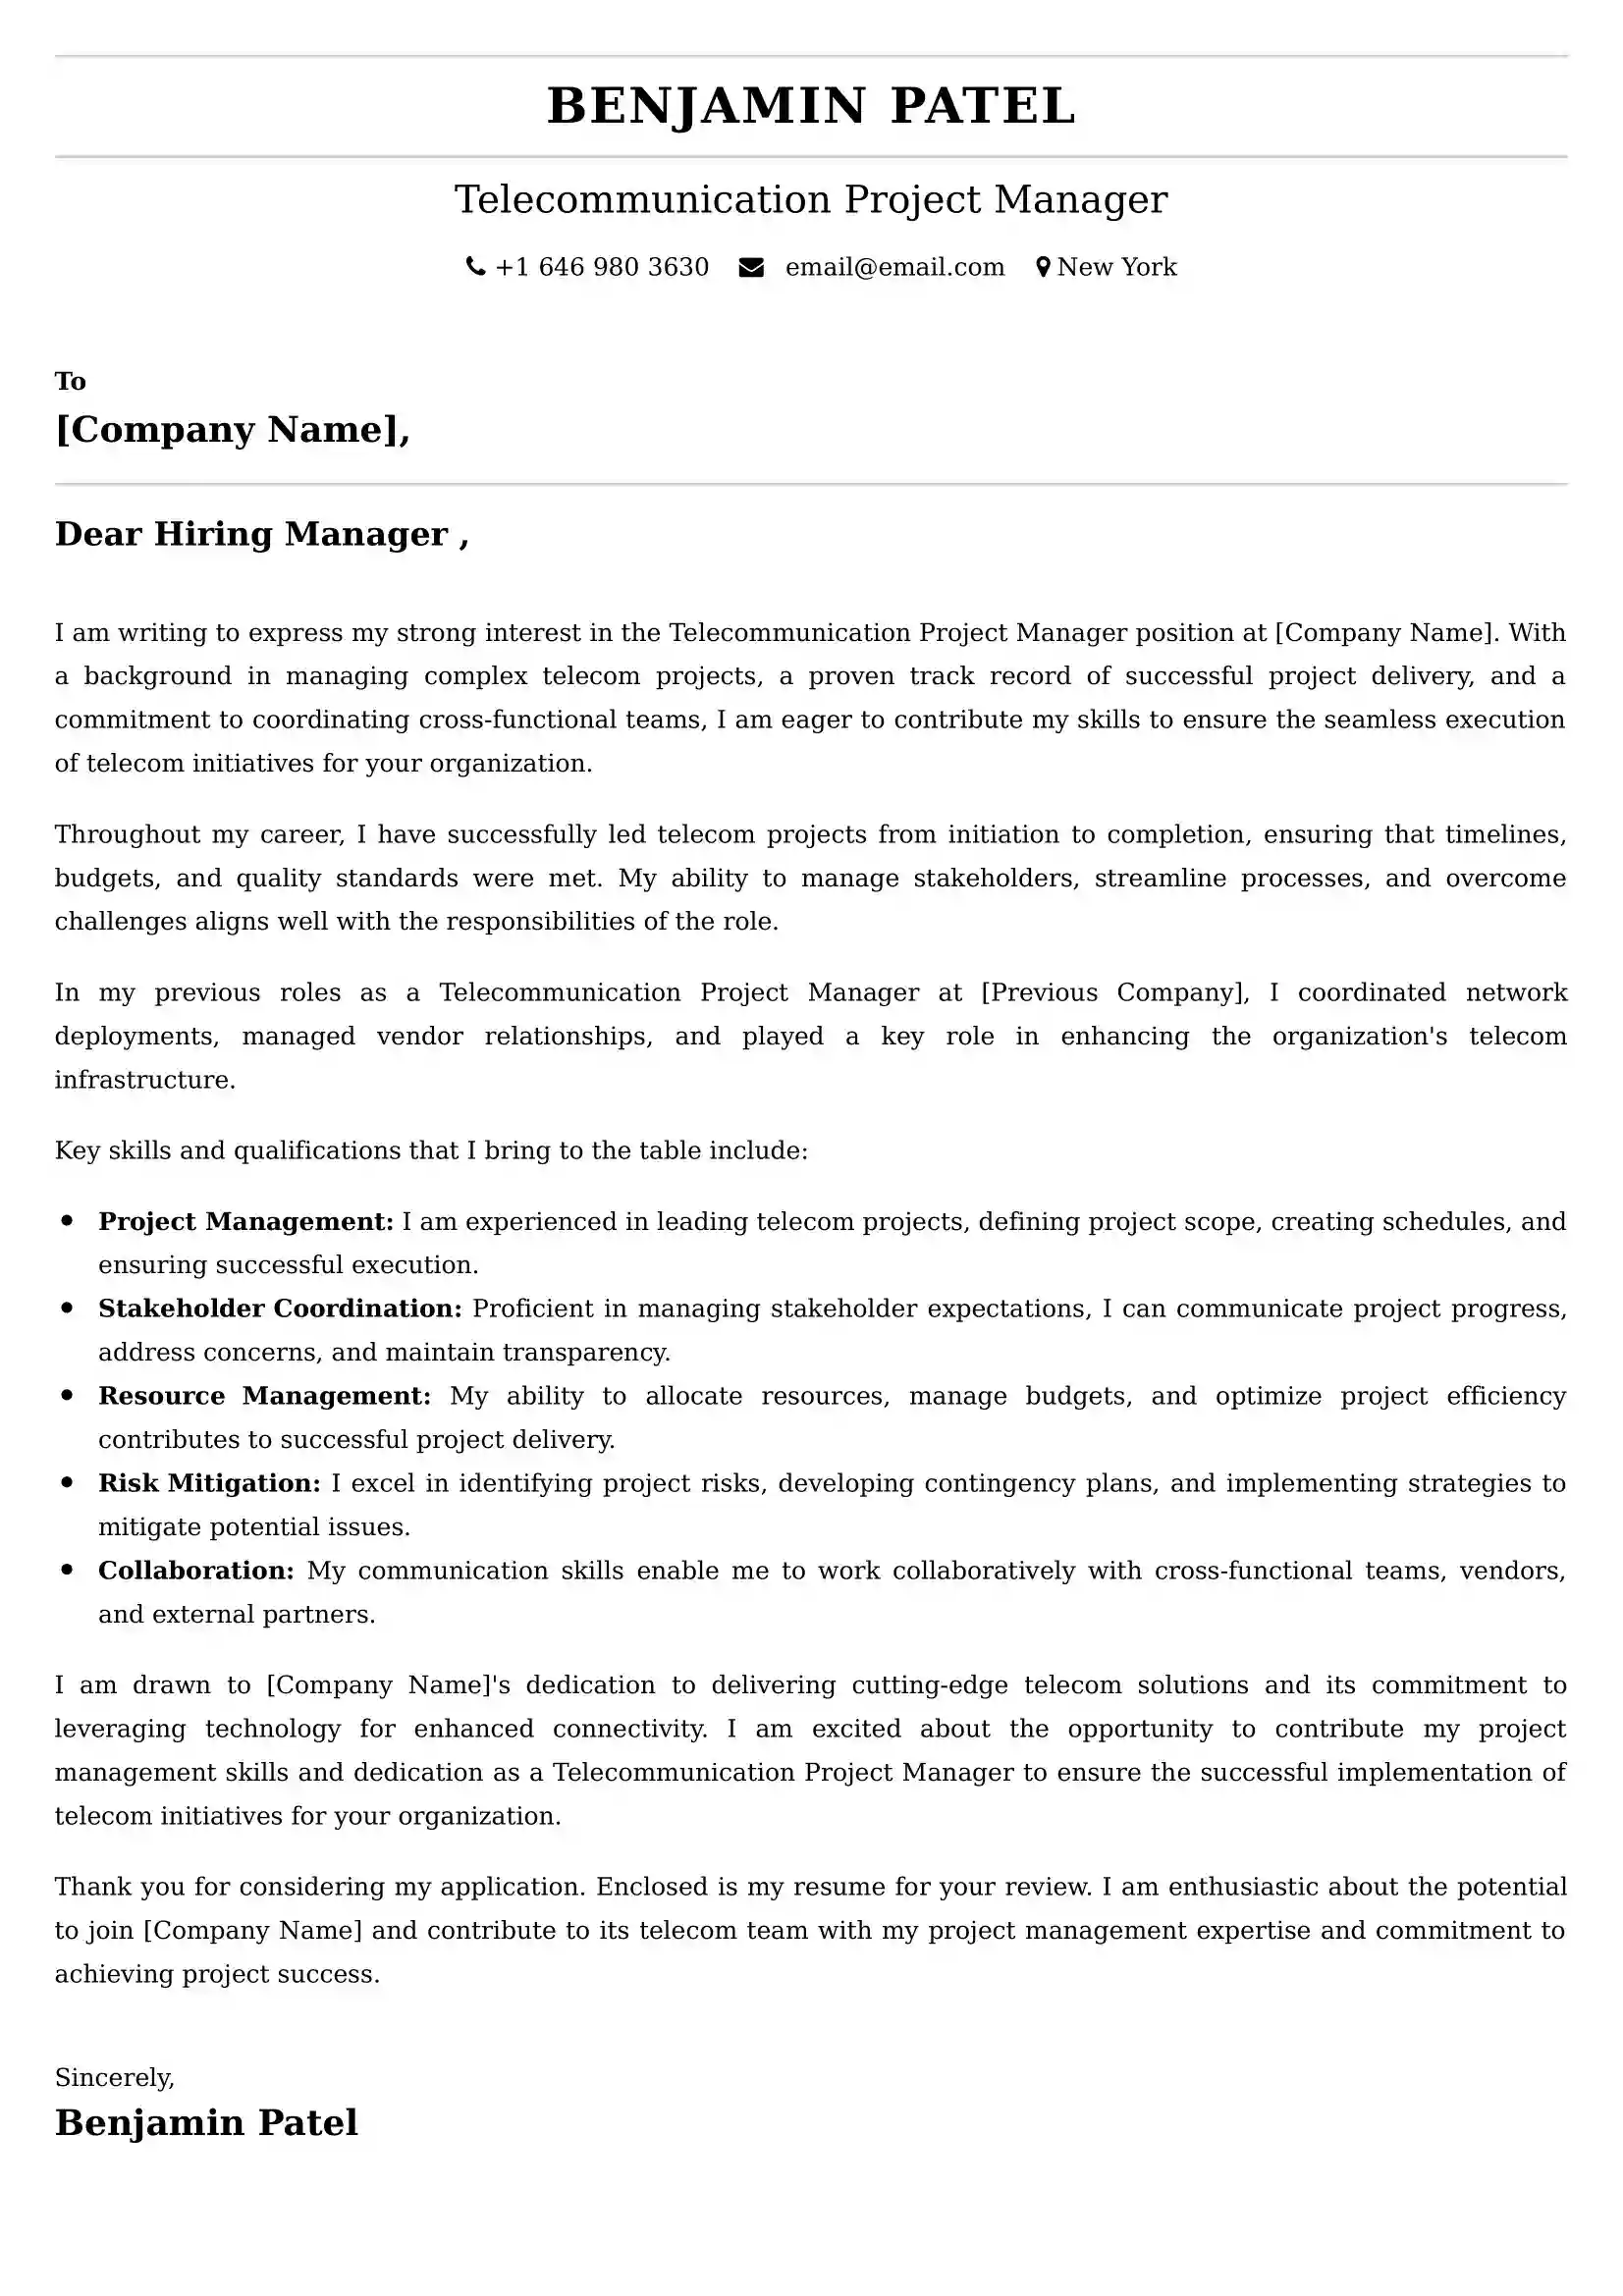 Telecommunication Project Manager Cover Letter Examples for UAE 